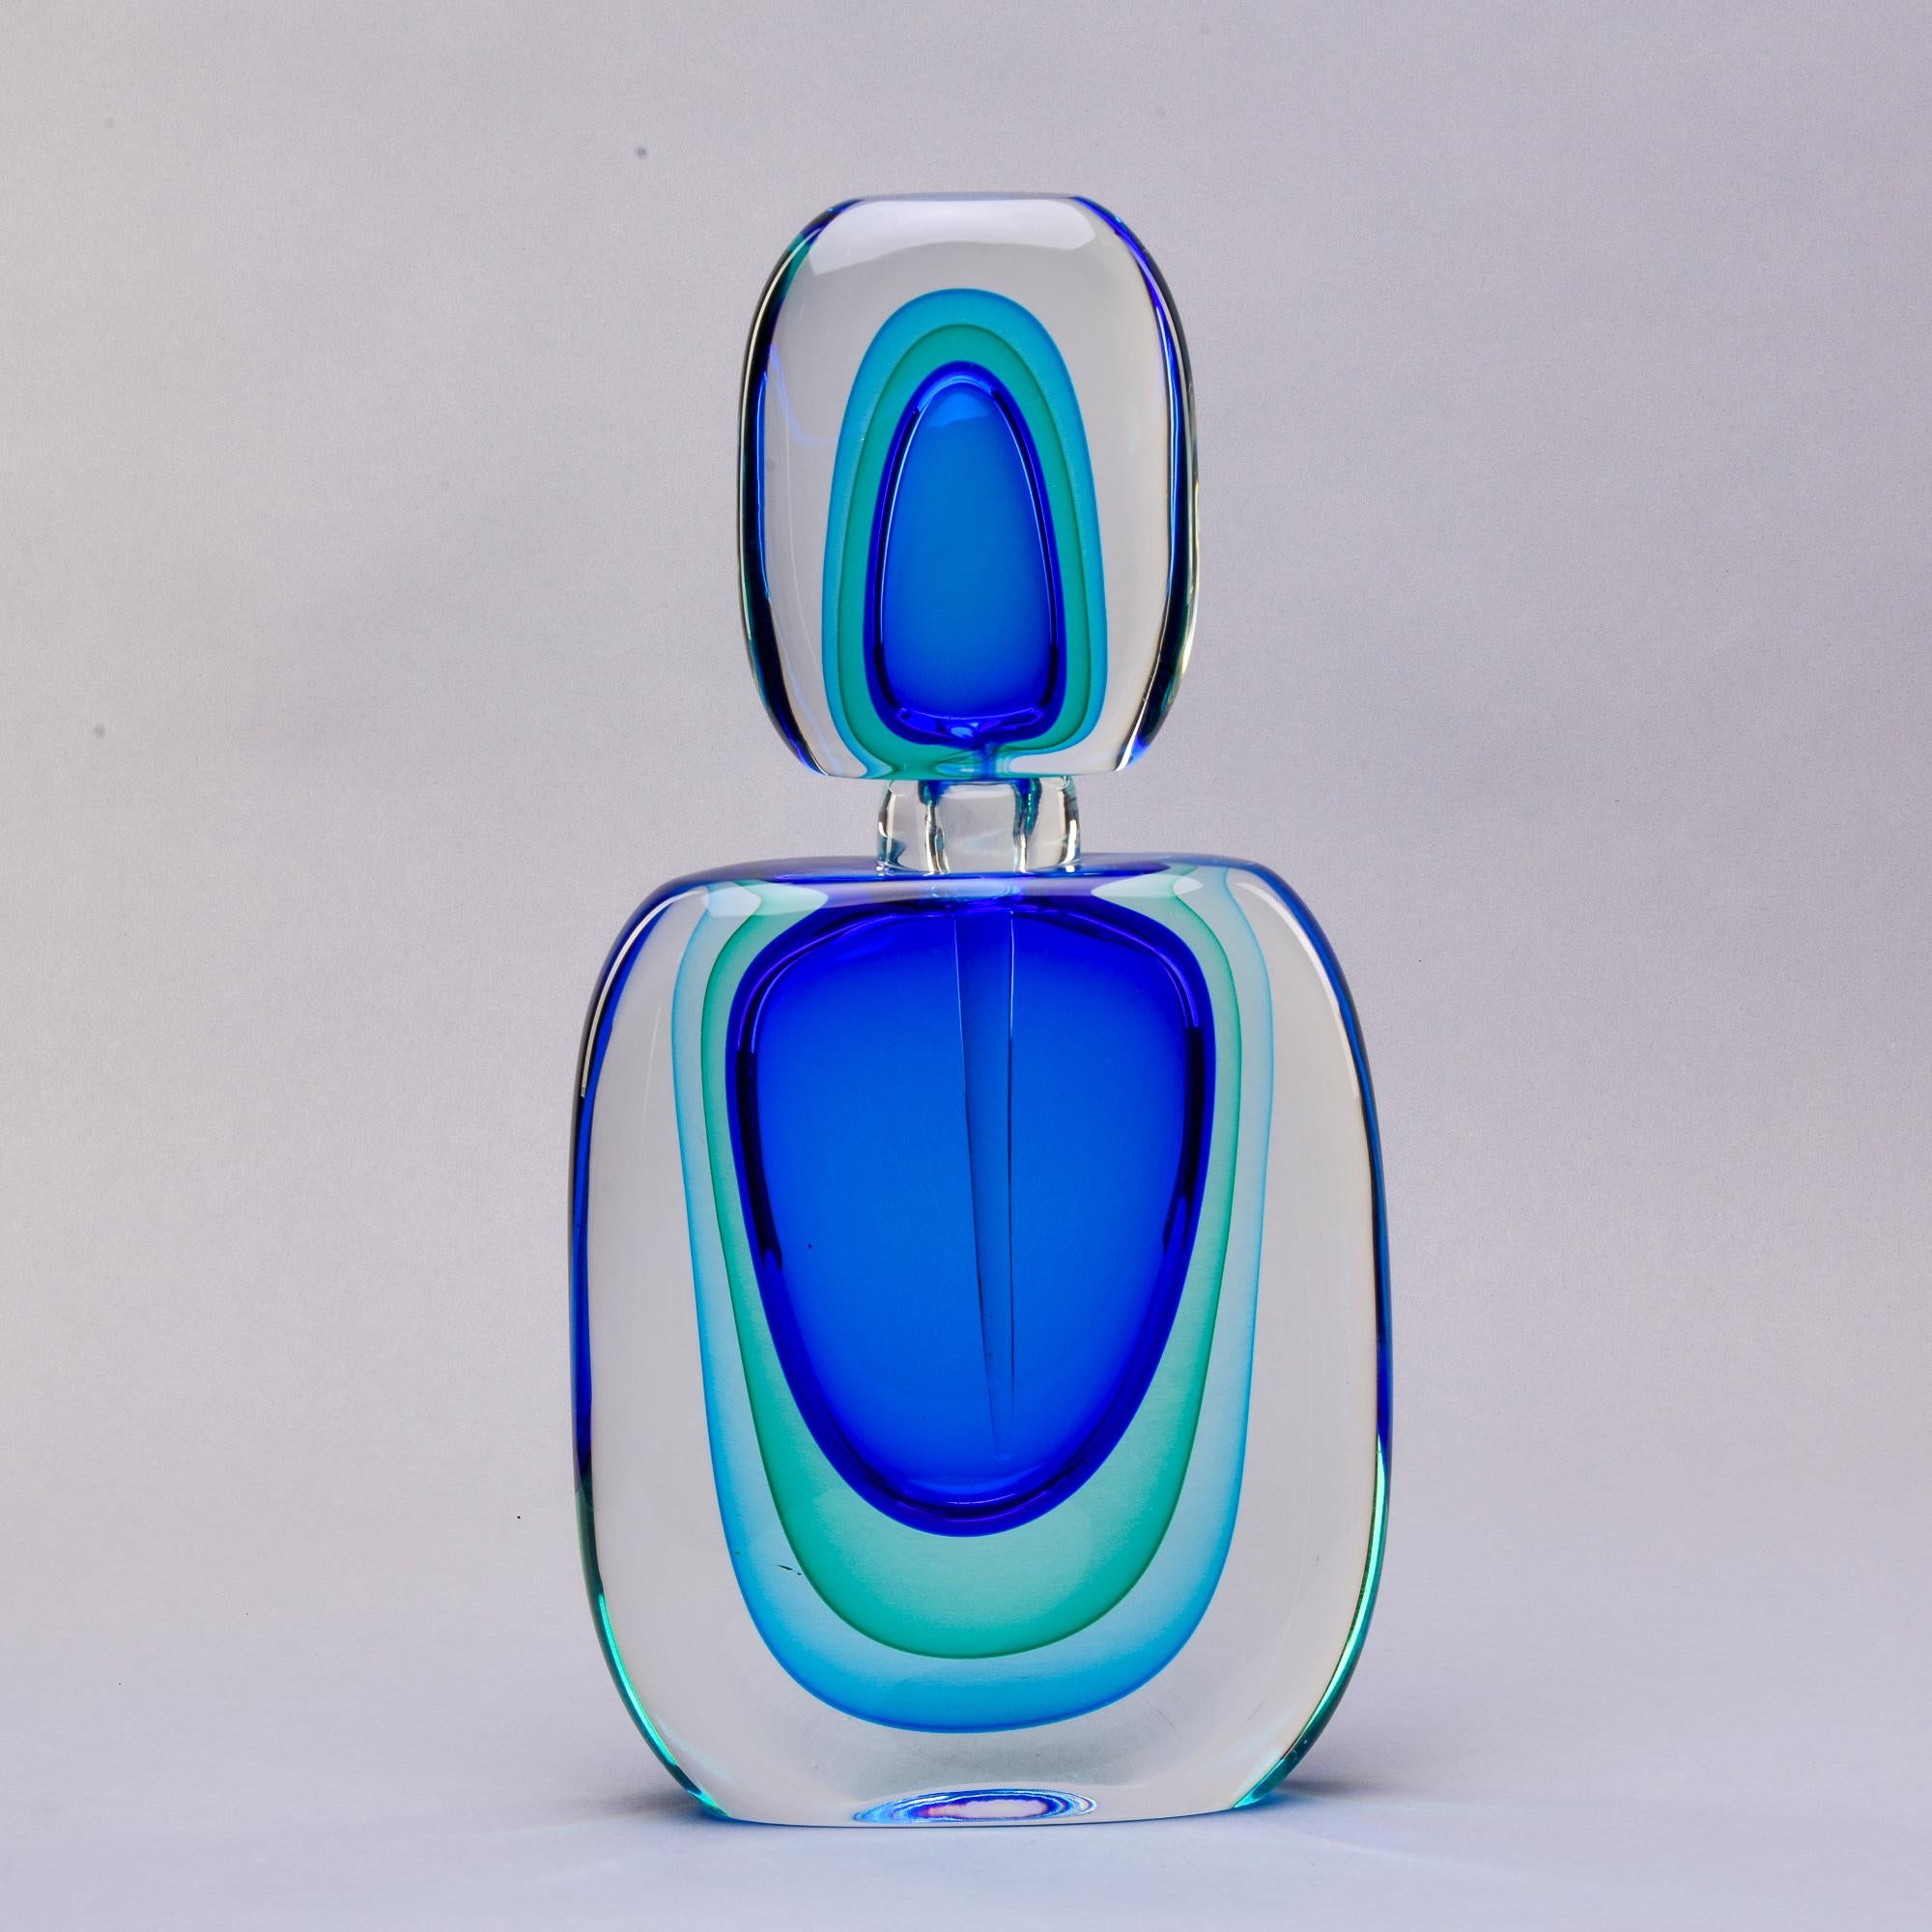 New oversized Murano glass perfume bottle stands 18.5” tall. Done in sommerso style with layers of blue and green toned glass submerged in heavy clear glass. Coordinated stopper has an attached scent dabber. Unsigned - unknown Murano maker. At the